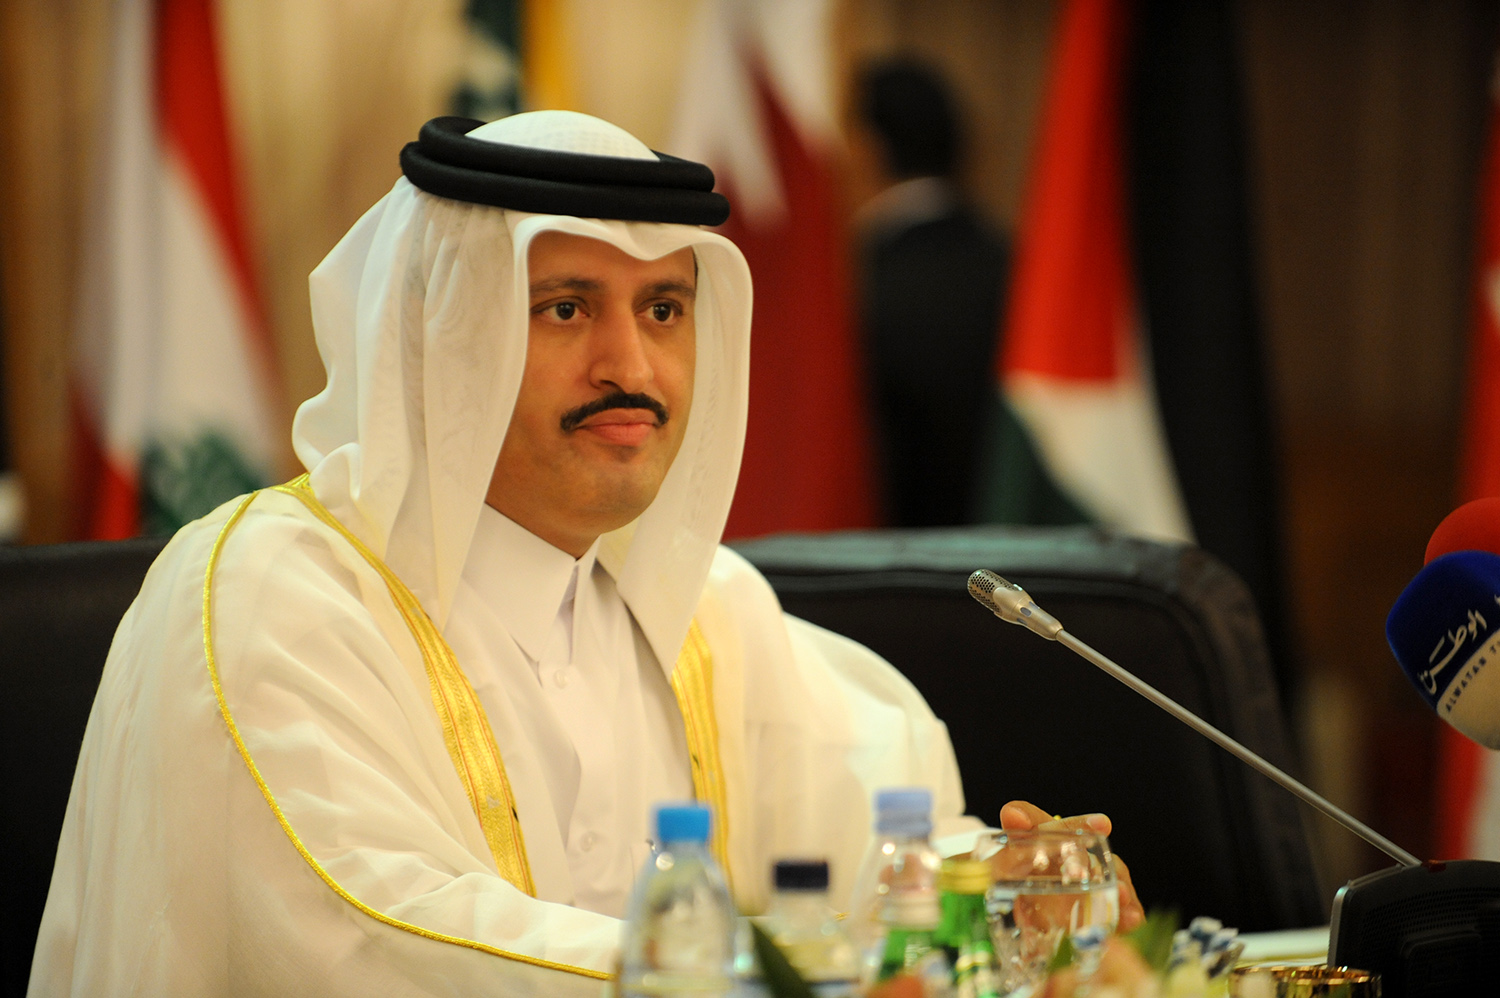 Undersecretary of the Ministry of Economy and Commerce Sultan bin Rashed Al-Khater